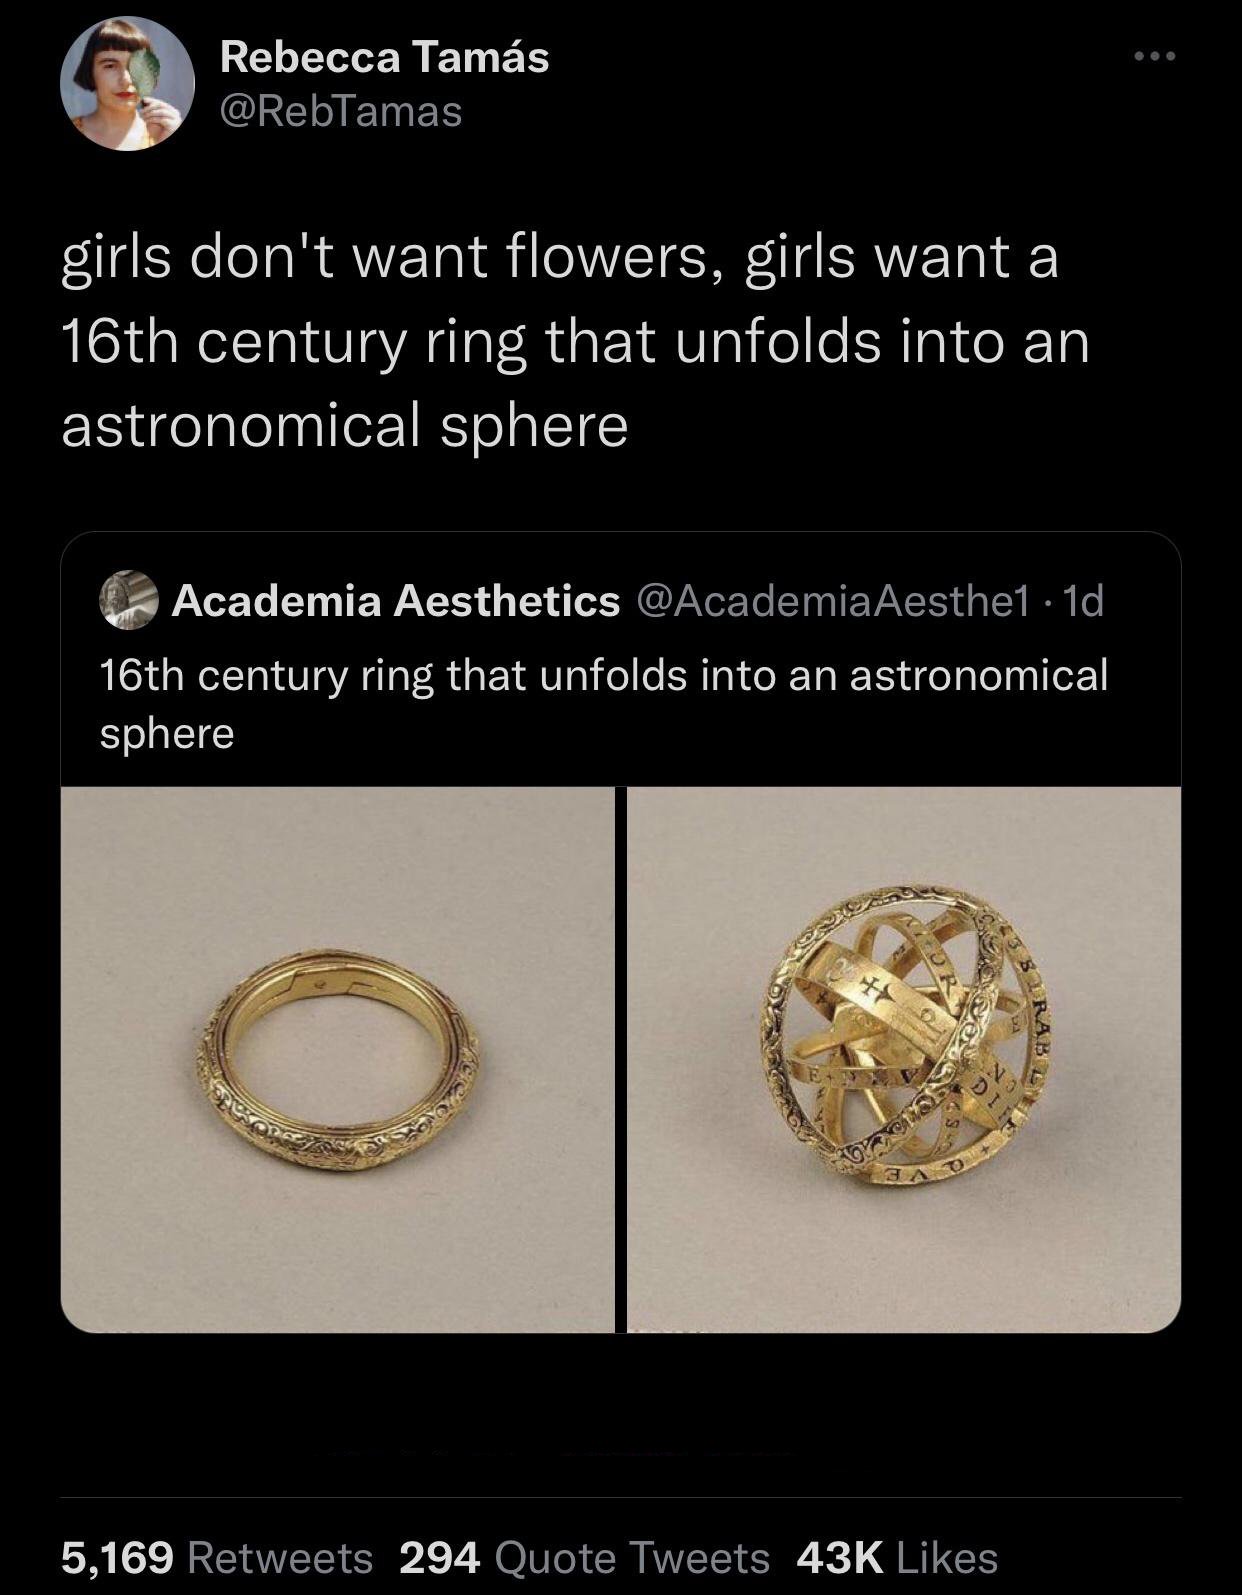 funny tweets - ring - Rebecca Tams girls don't want flowers, girls want a 16th century ring that unfolds into an astronomical sphere Academia Aesthetics 16th century ring that unfolds into an astronomical sphere 5,169 294 Quote Tweets 43K Goenas Un Sh Rab